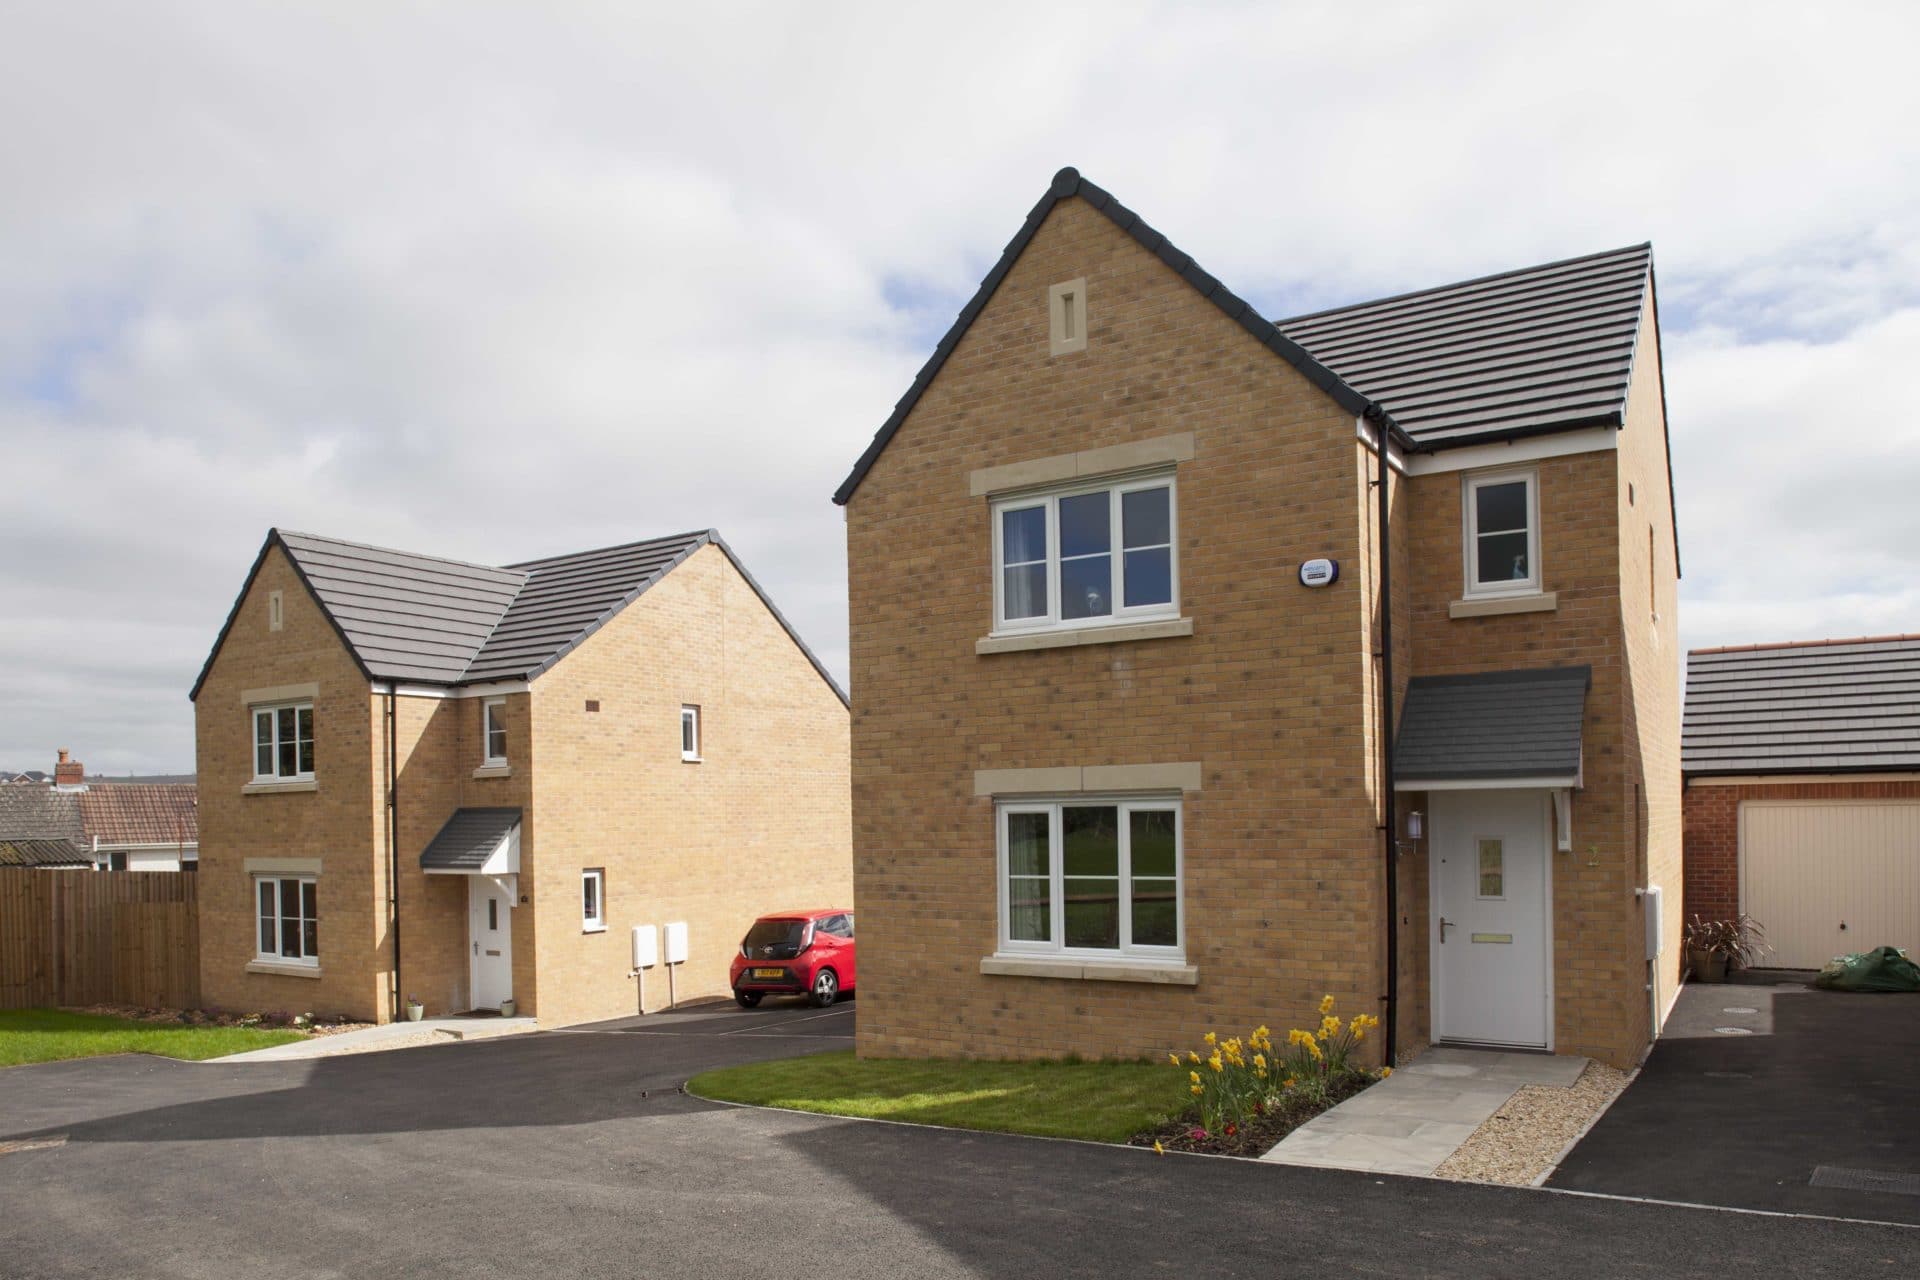 Kingspan Kooltherm boost thermal performance for Welsh housing scheme